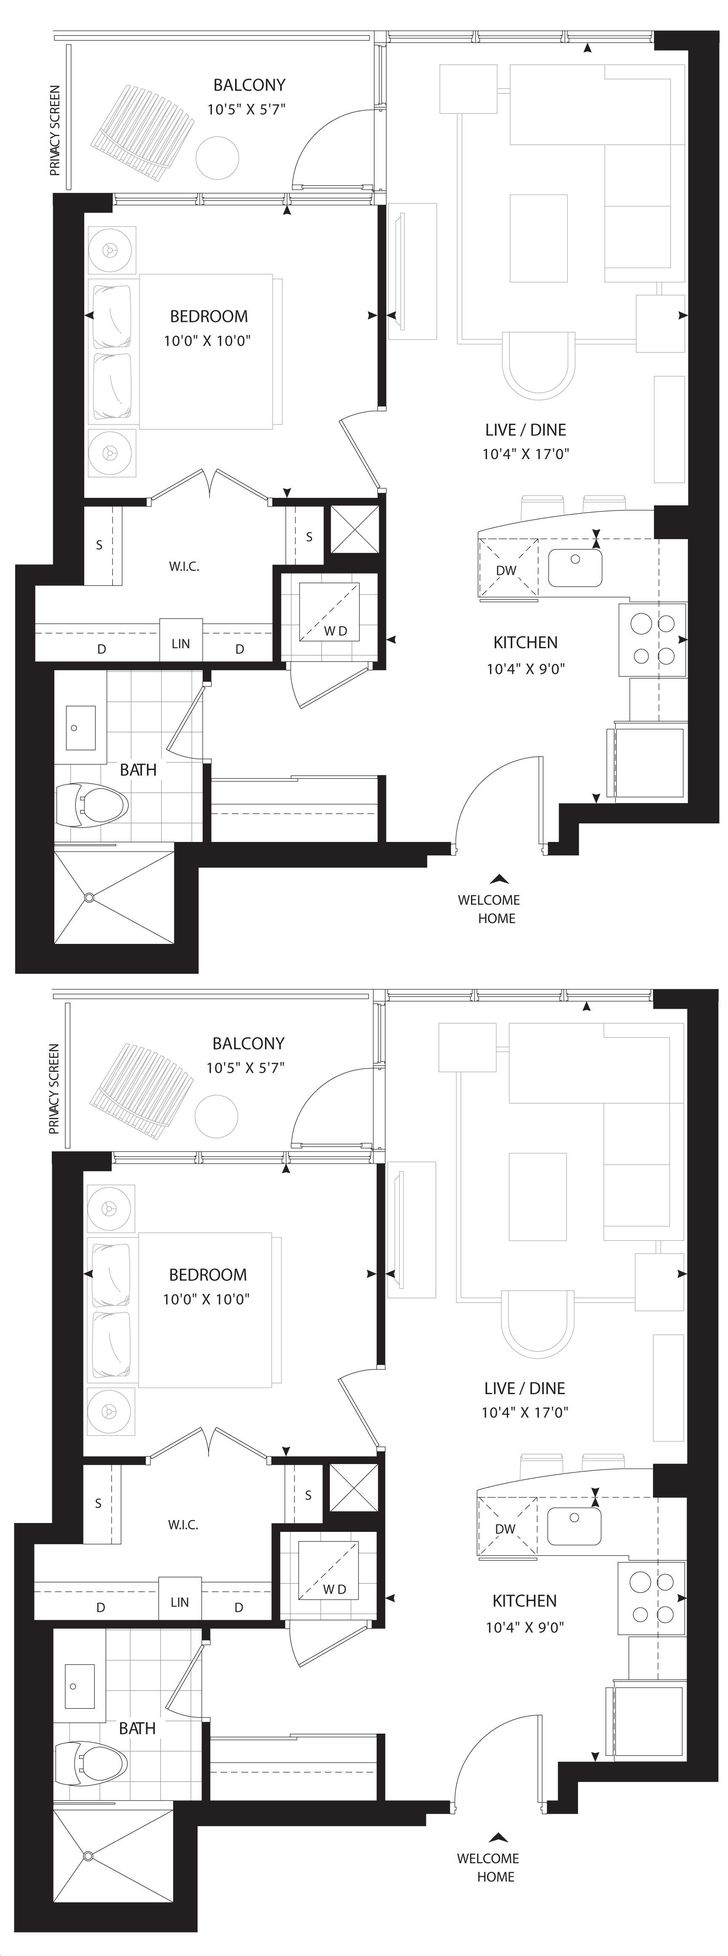 Minto 30 Roe by Minto Bayview Floorplan 1 bed & 1 bath